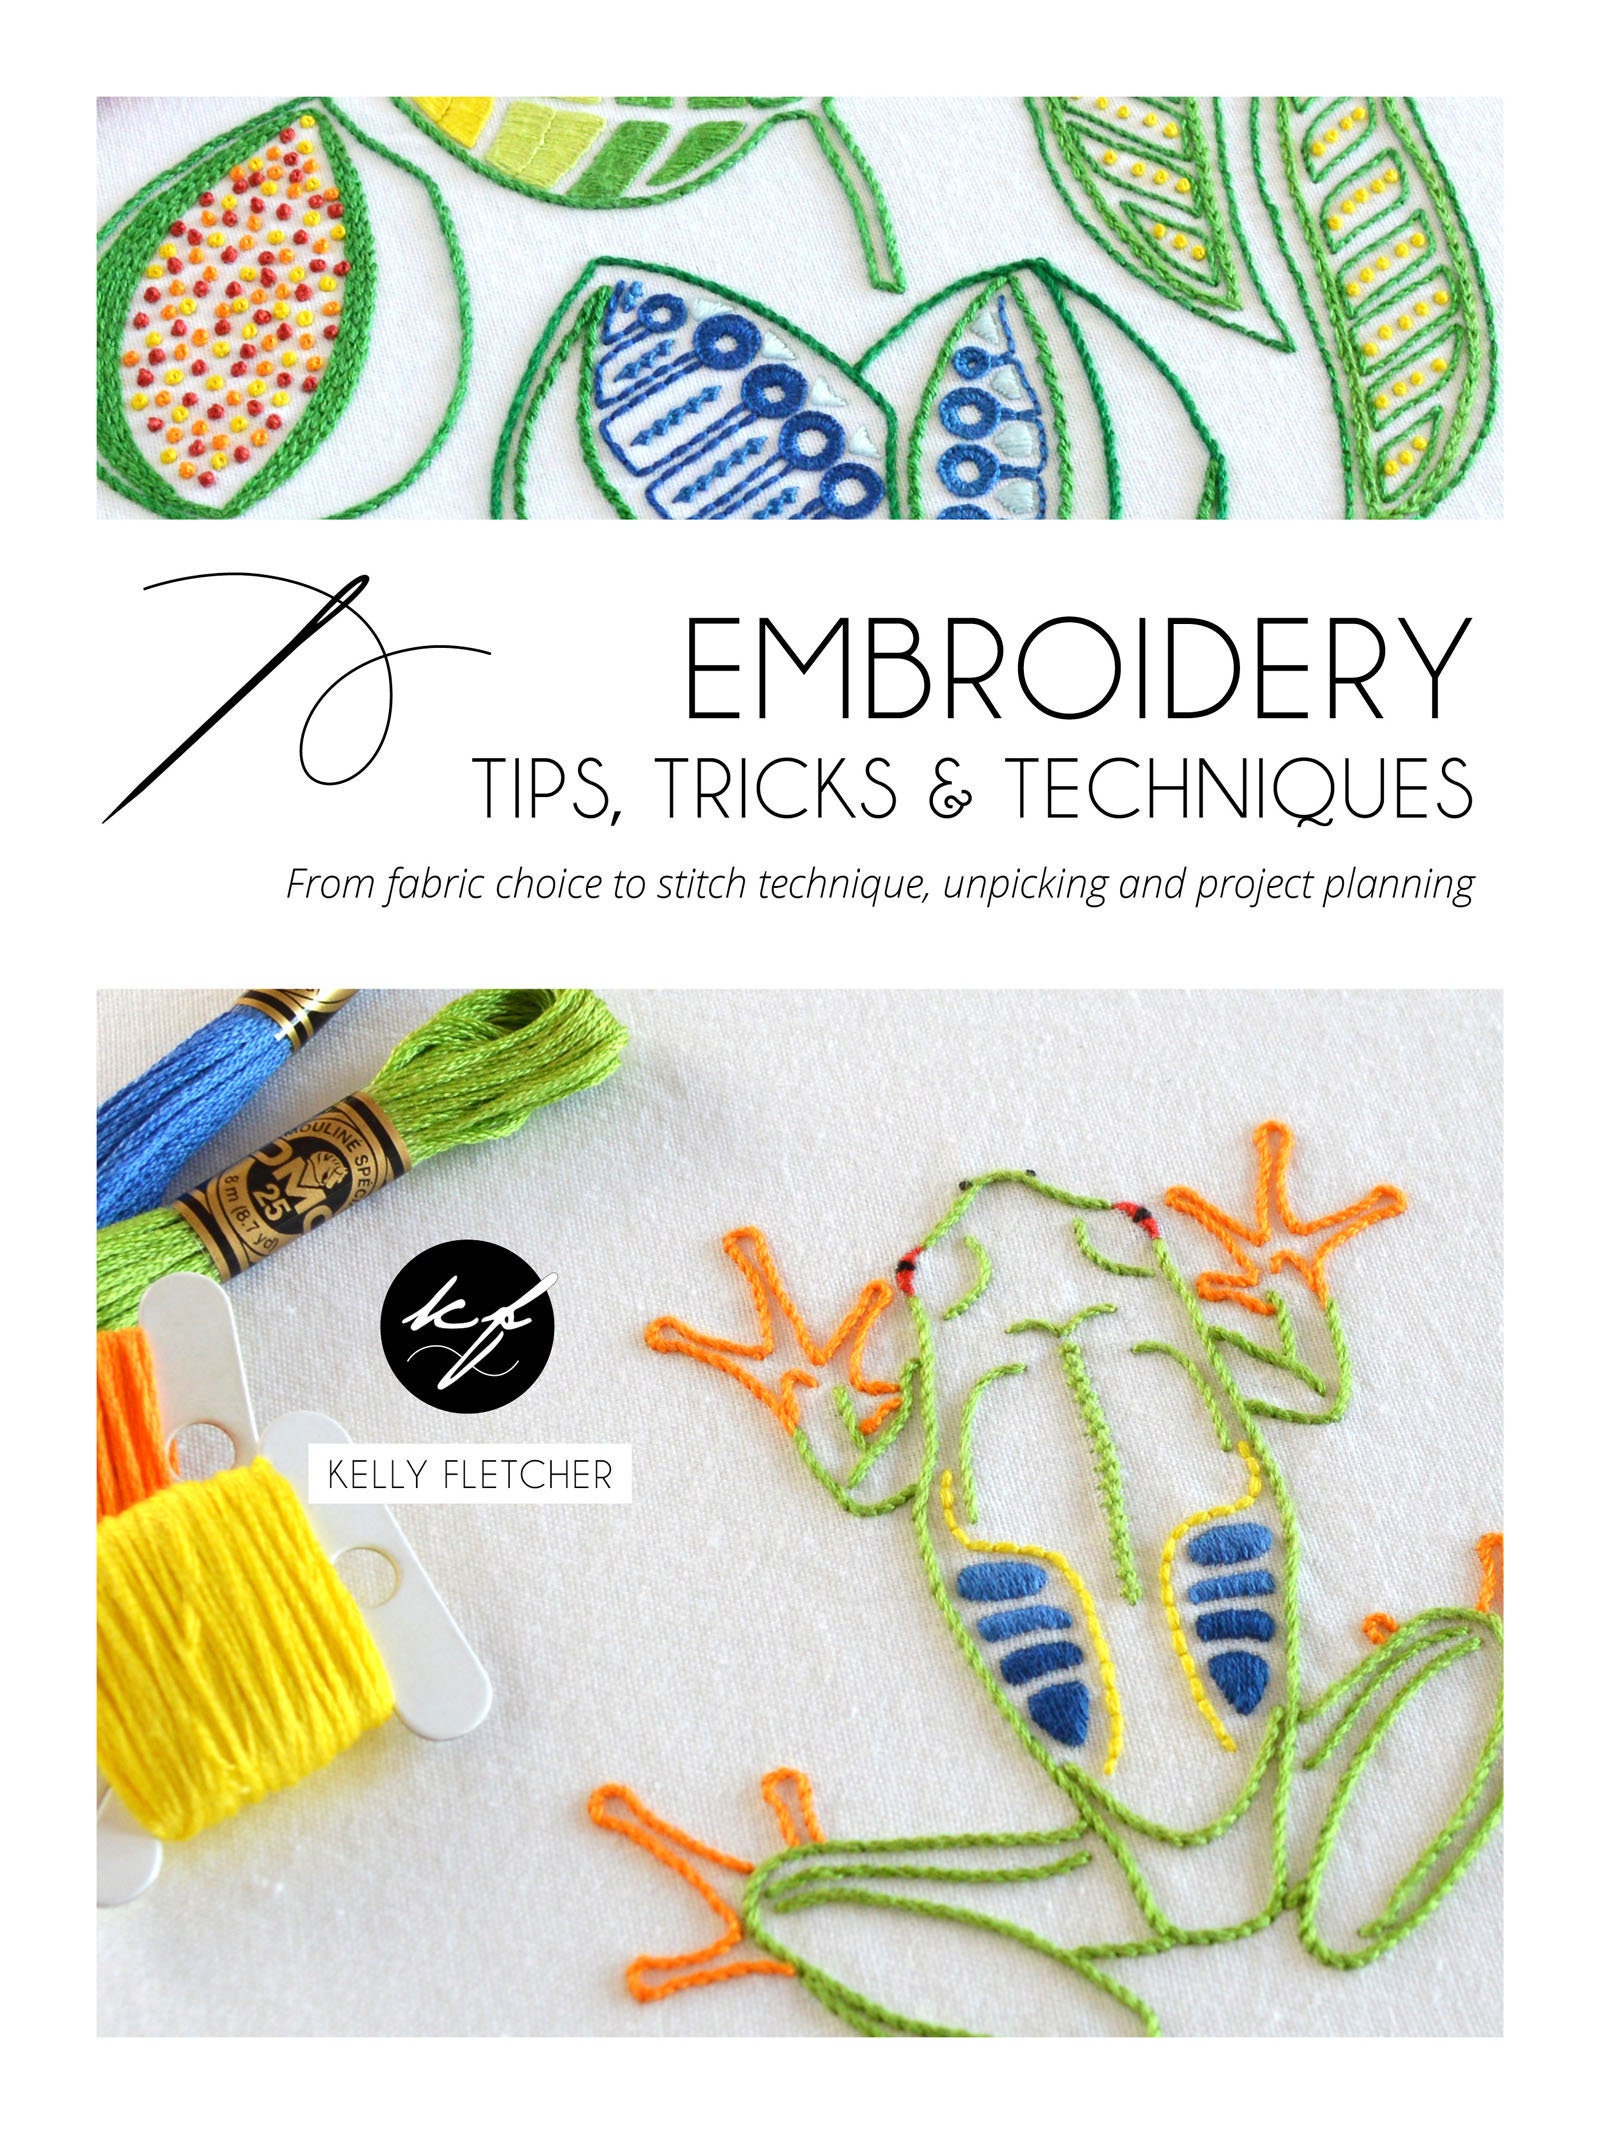 Creative Stitches for Contemporary Embroidery: Visual Guide to 120 Essential Stitches for Stunning Designs [Book]